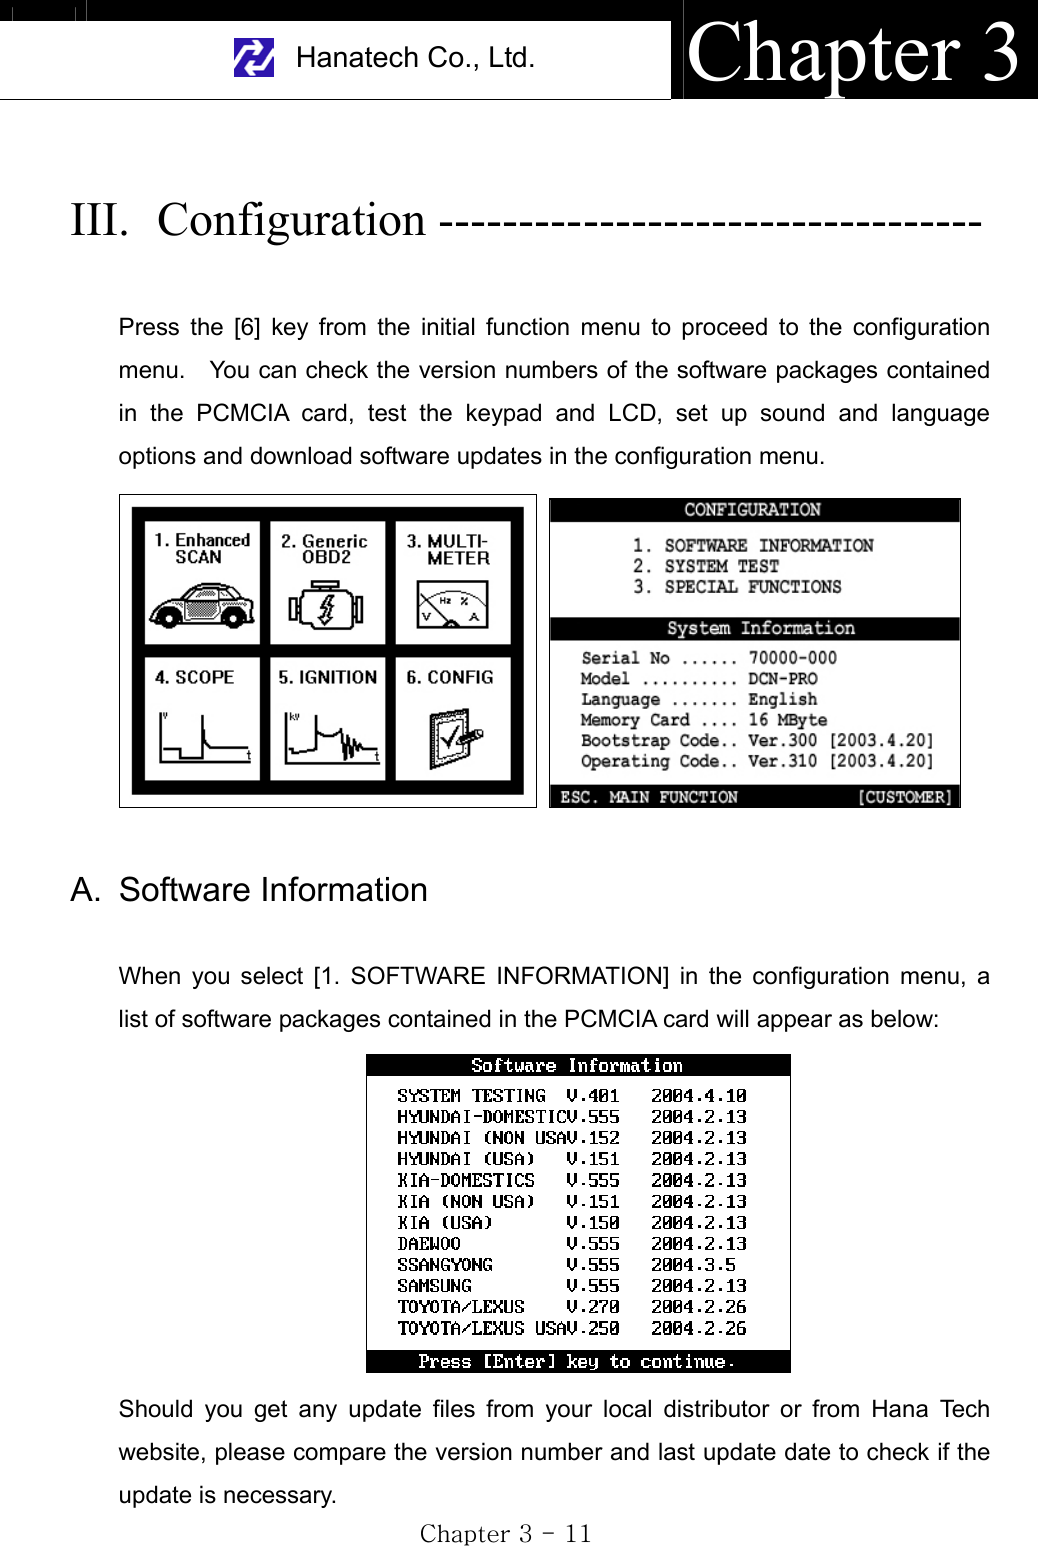 Hanatech Co., Ltd.  Chapter 3GjGZGTGXXGIII. Configuration ---------------------------------- Press the [6] key from the initial function menu to proceed to the configuration menu.    You can check the version numbers of the software packages contained in the PCMCIA card, test the keypad and LCD, set up sound and language options and download software updates in the configuration menu. A. Software Information When you select [1. SOFTWARE INFORMATION] in the configuration menu, a list of software packages contained in the PCMCIA card will appear as below: Should you get any update files from your local distributor or from Hana Tech website, please compare the version number and last update date to check if the update is necessary. 